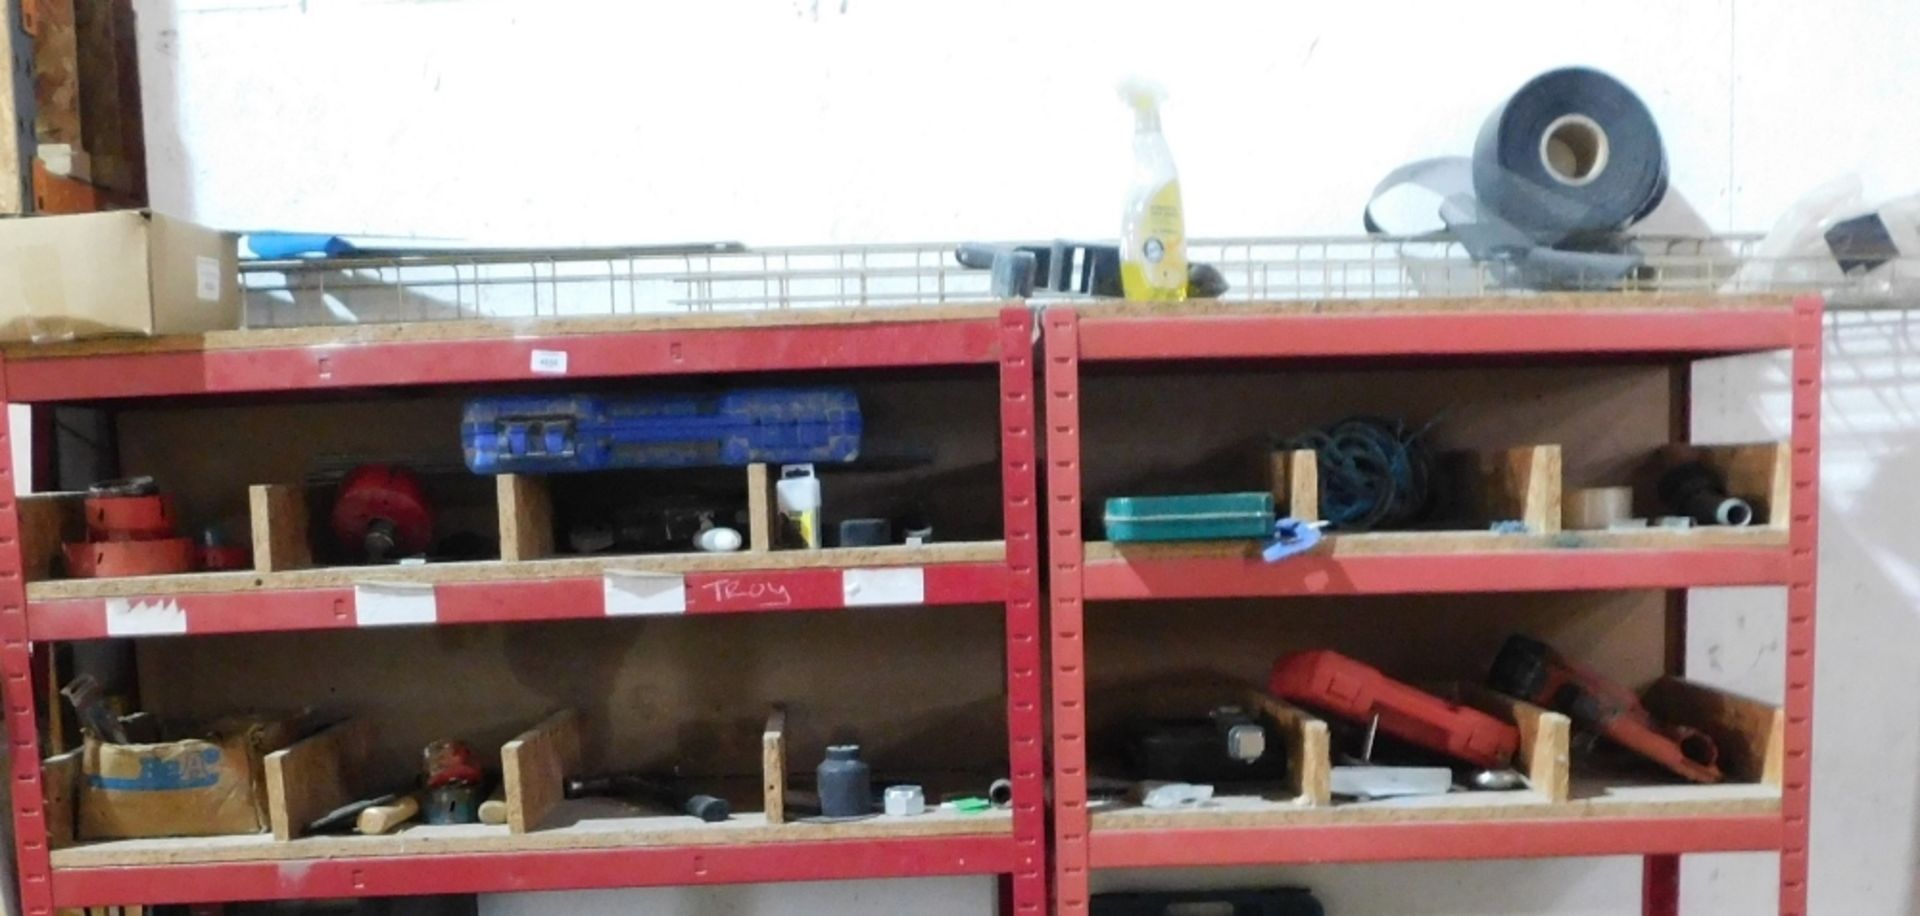 Two red steel part racks and including the residual contents, being various tools, staple guns, etc.